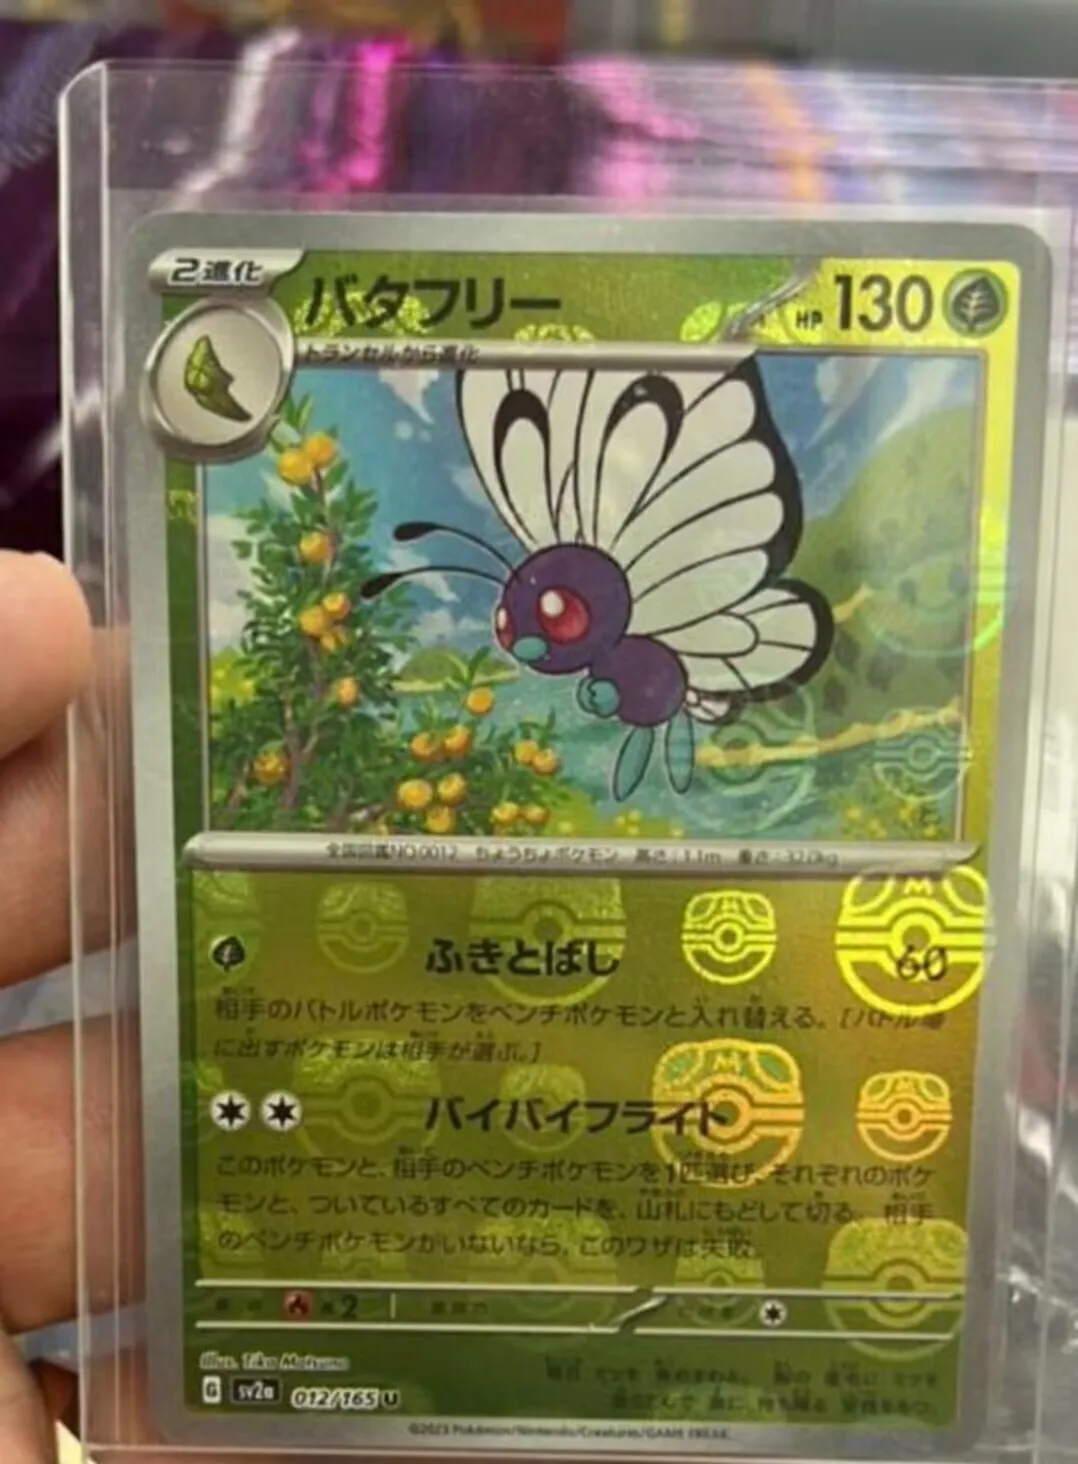 

PTCG Pokemon Card SV2a 012/165 MASTER BALL Butterfree Scarlet & Violet 151 Collection Mint Card